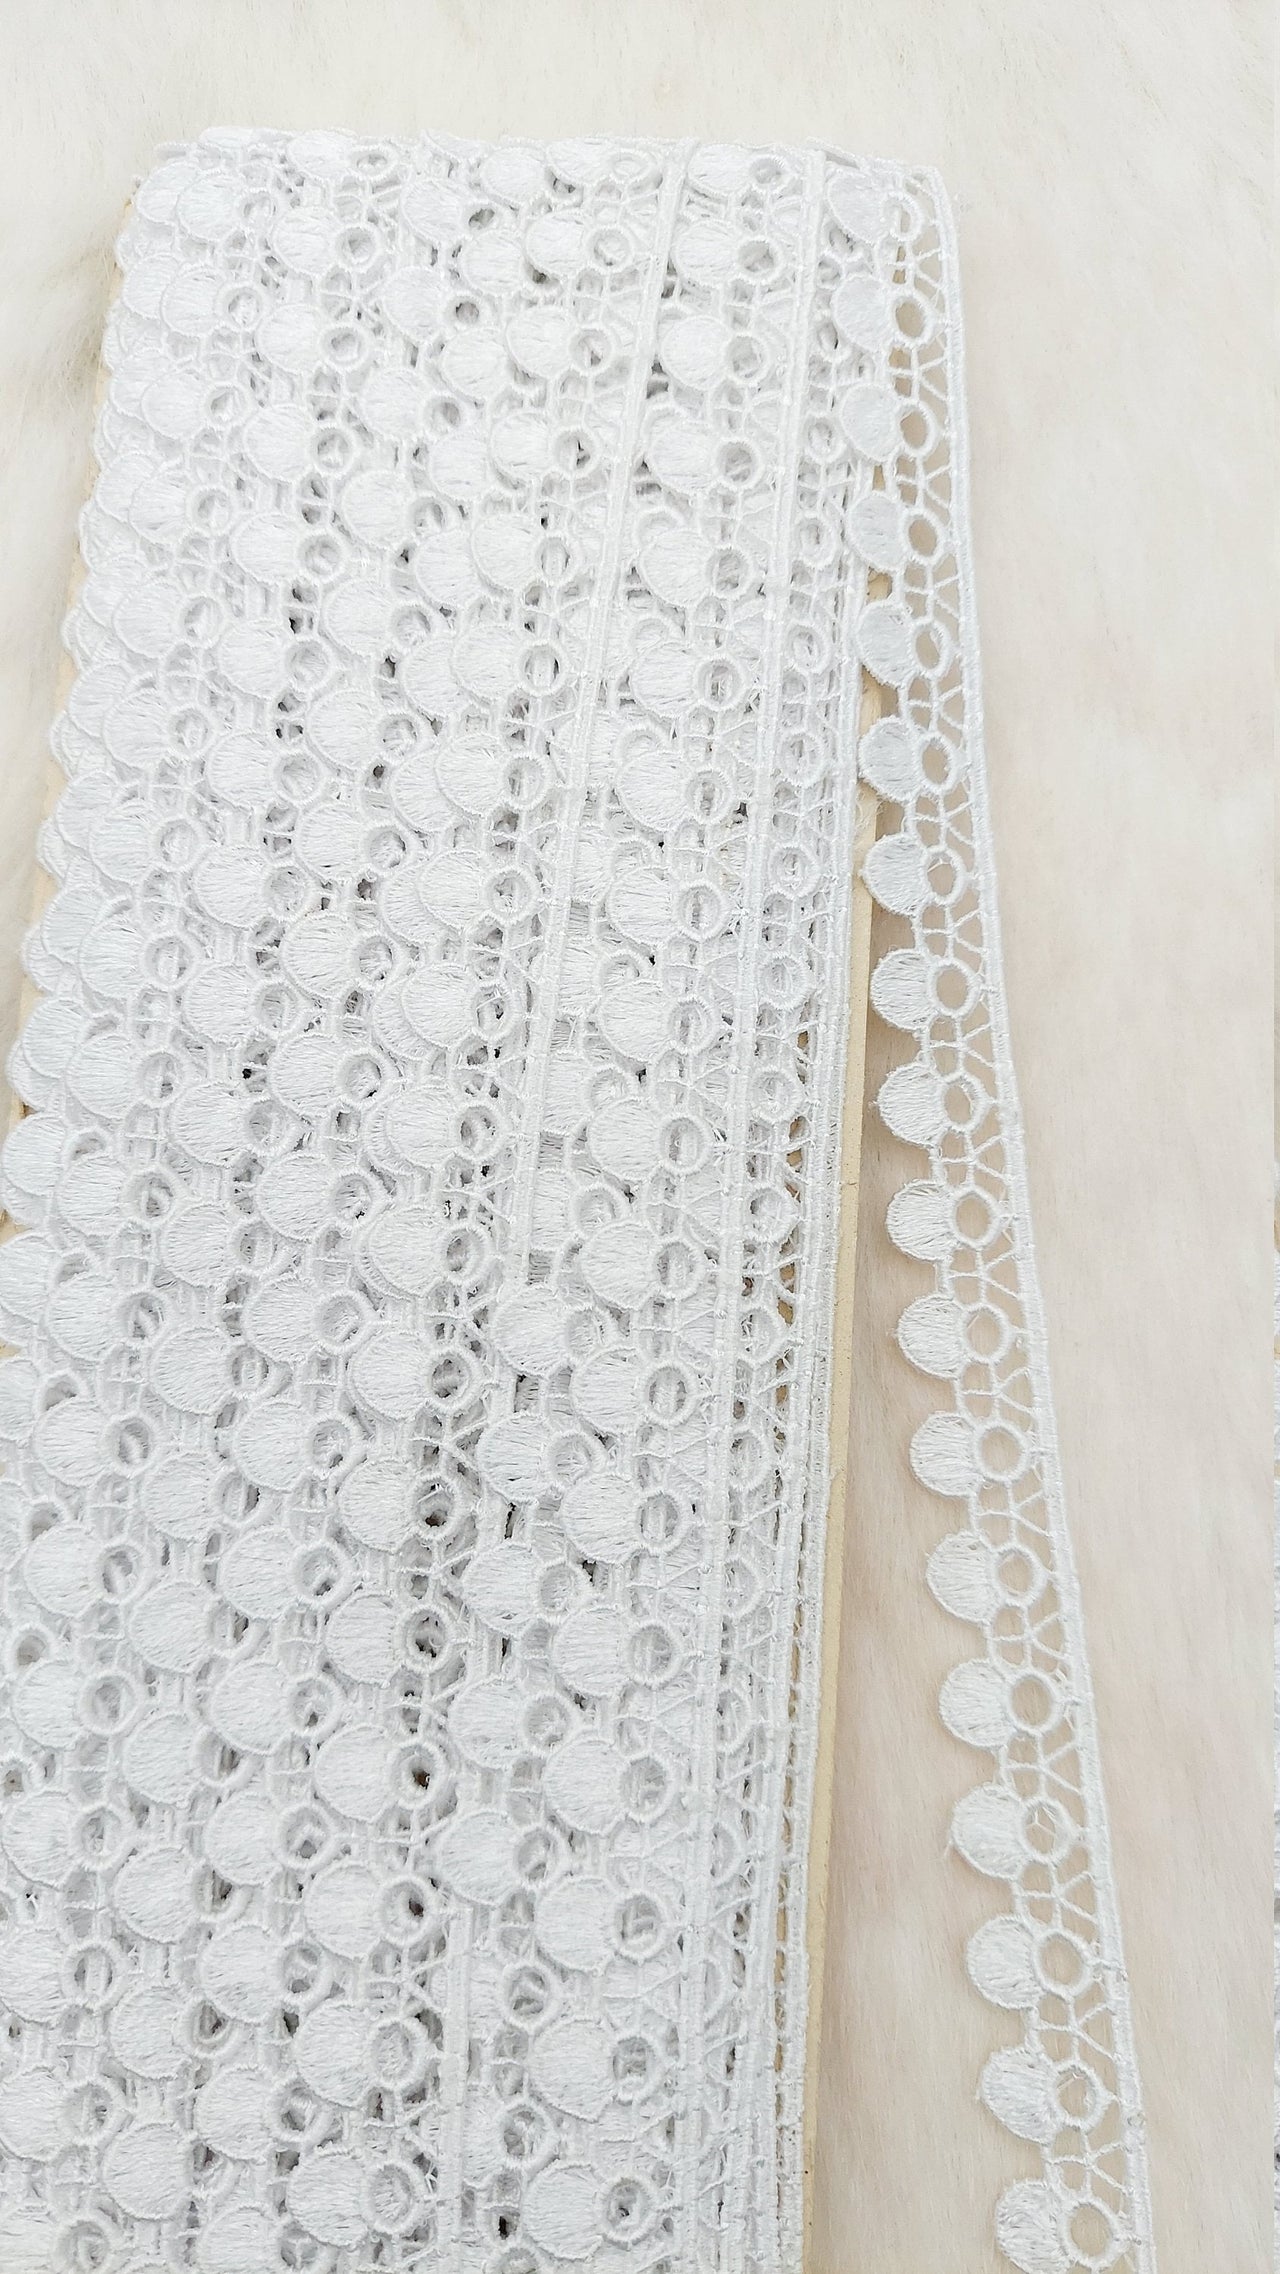 Fringe Trim, Polyester Embroidered Crafting Edging Lace Trim, Trim by 2 Yards